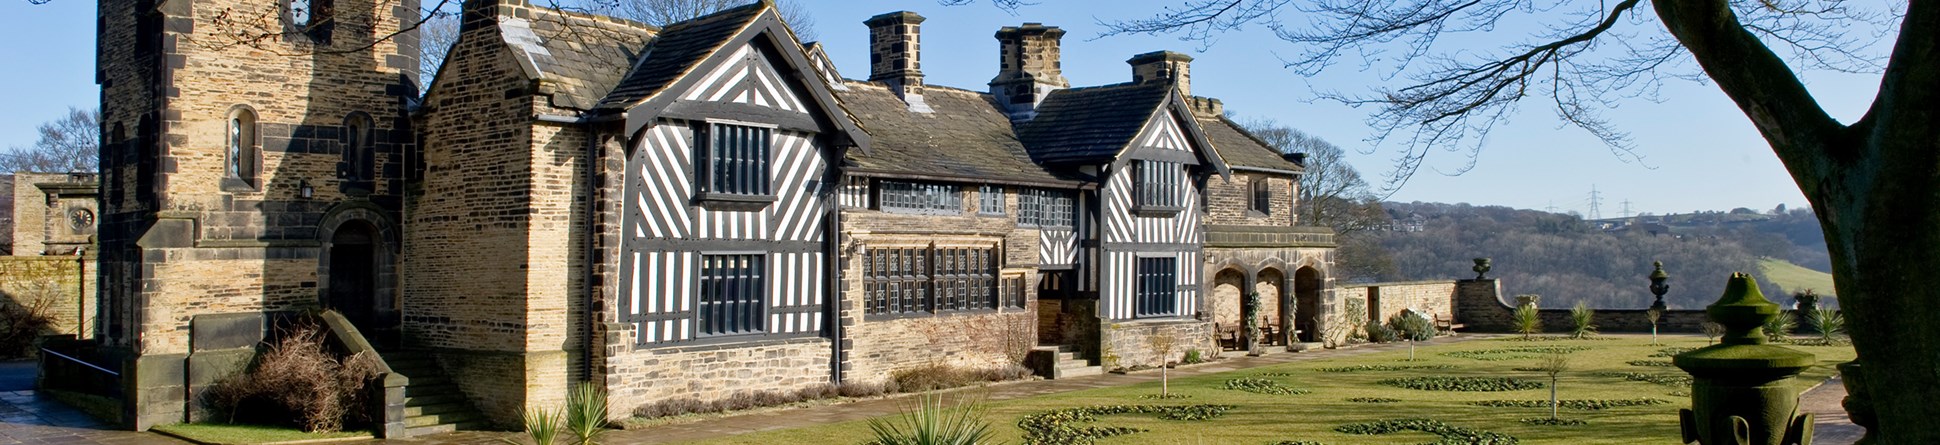 Photo of Shibden Hall, a long house with a mix of timber-framed and stonework walls. A stone tower stands slightly behind the house, closest to the camera. There are manicured gardens before the house and the path is lined with stone urns.